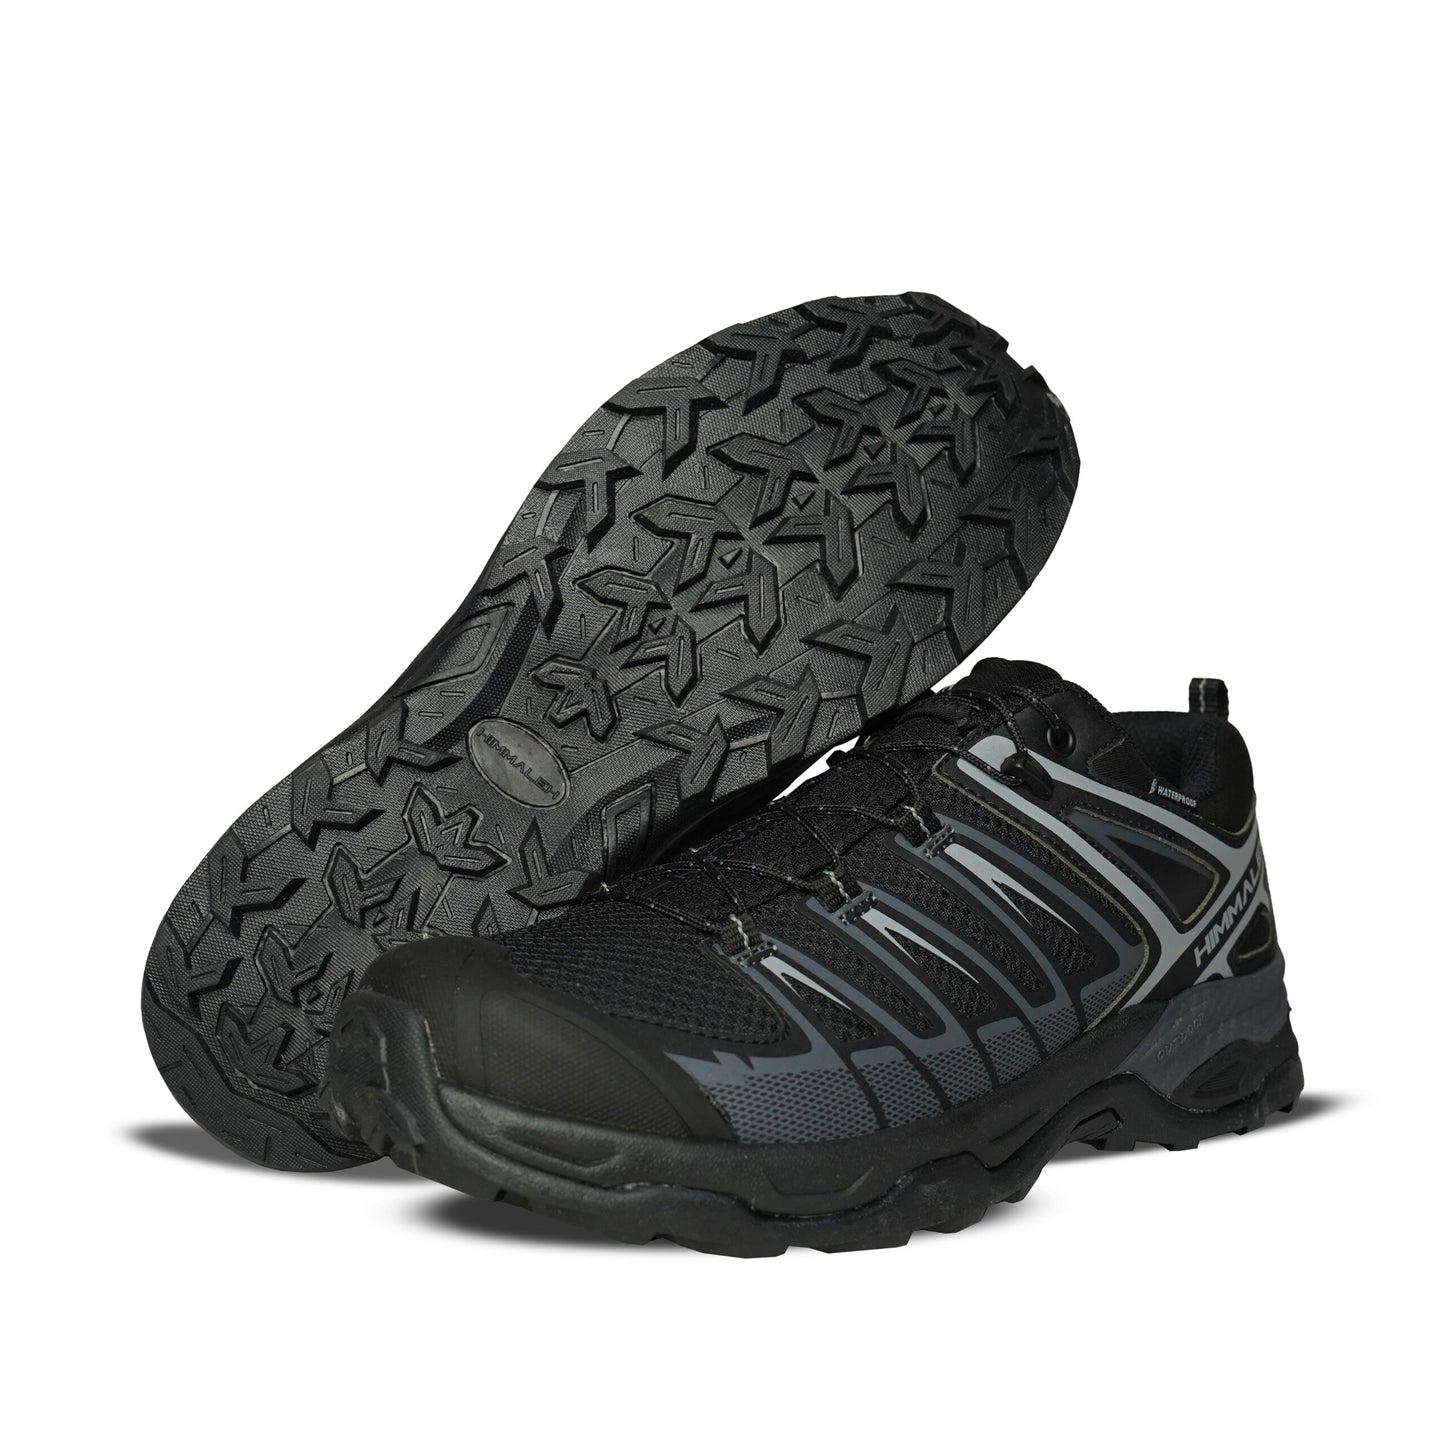 A pair of lightweight, multi-purpose hiking shoes featuring a durable toe cap, waterproof breathable membrane, and non-slip rubber outsole with 5mm gripping studs, designed for excellent cushioning and grip on various walking trails.